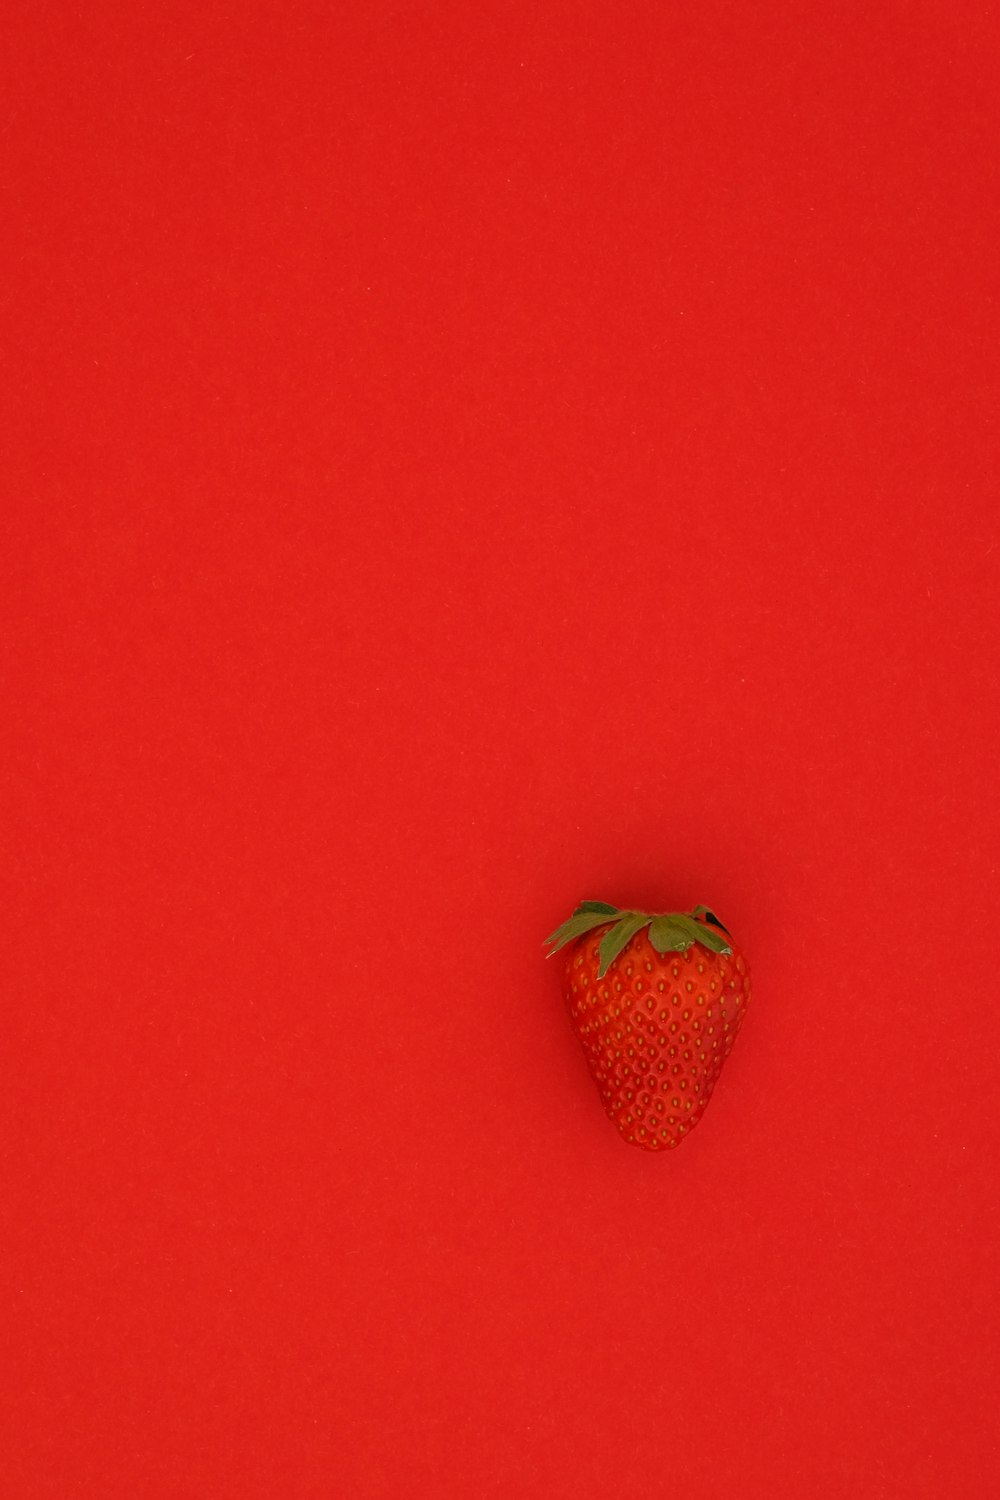 red strawberry fruit on red surface